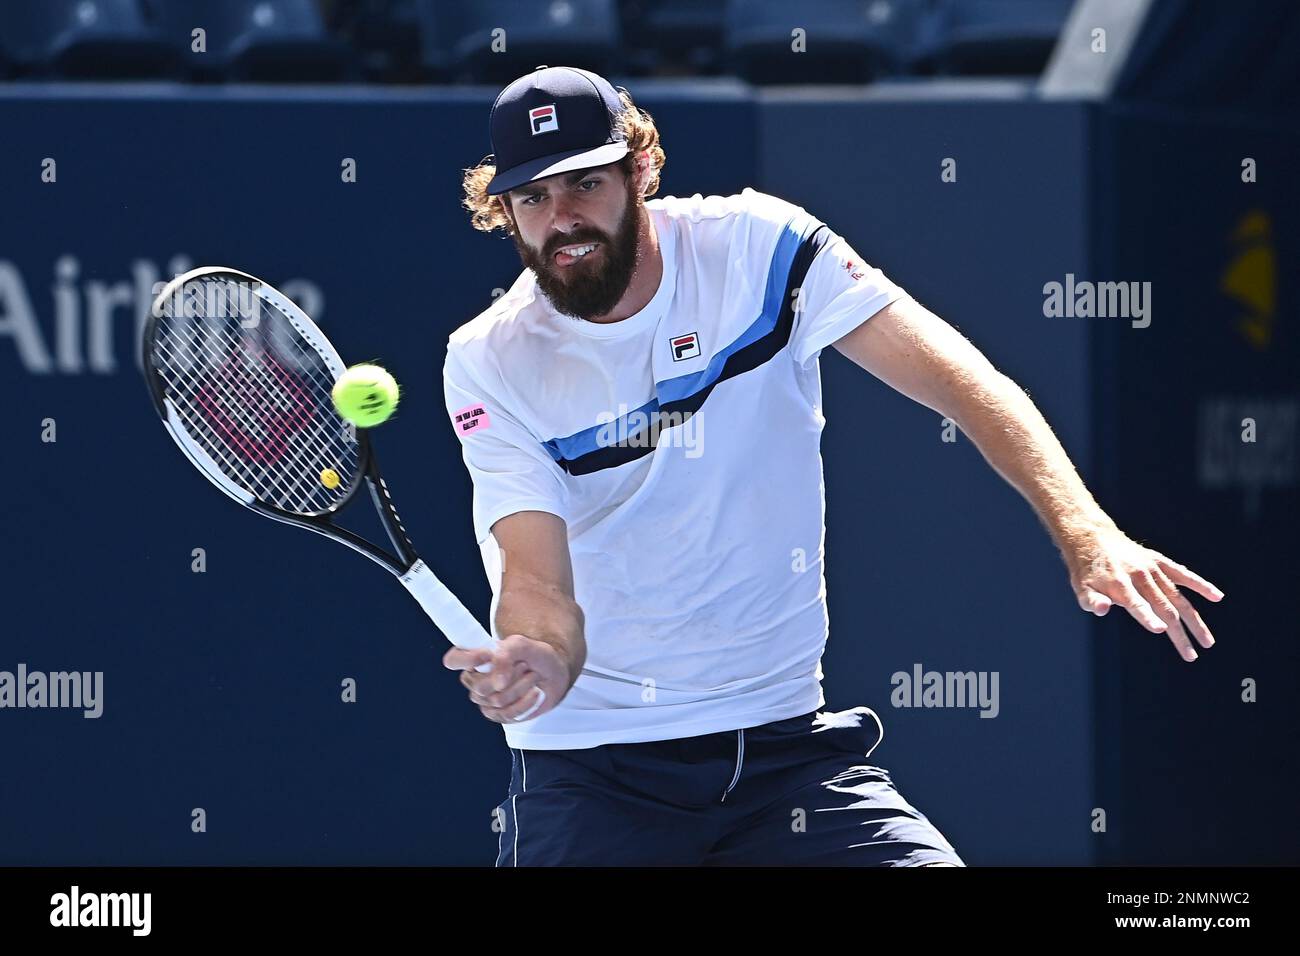 Reilly Opelka returns a shot during a Mens Singles match at the 2021 US Open, Monday, Sep